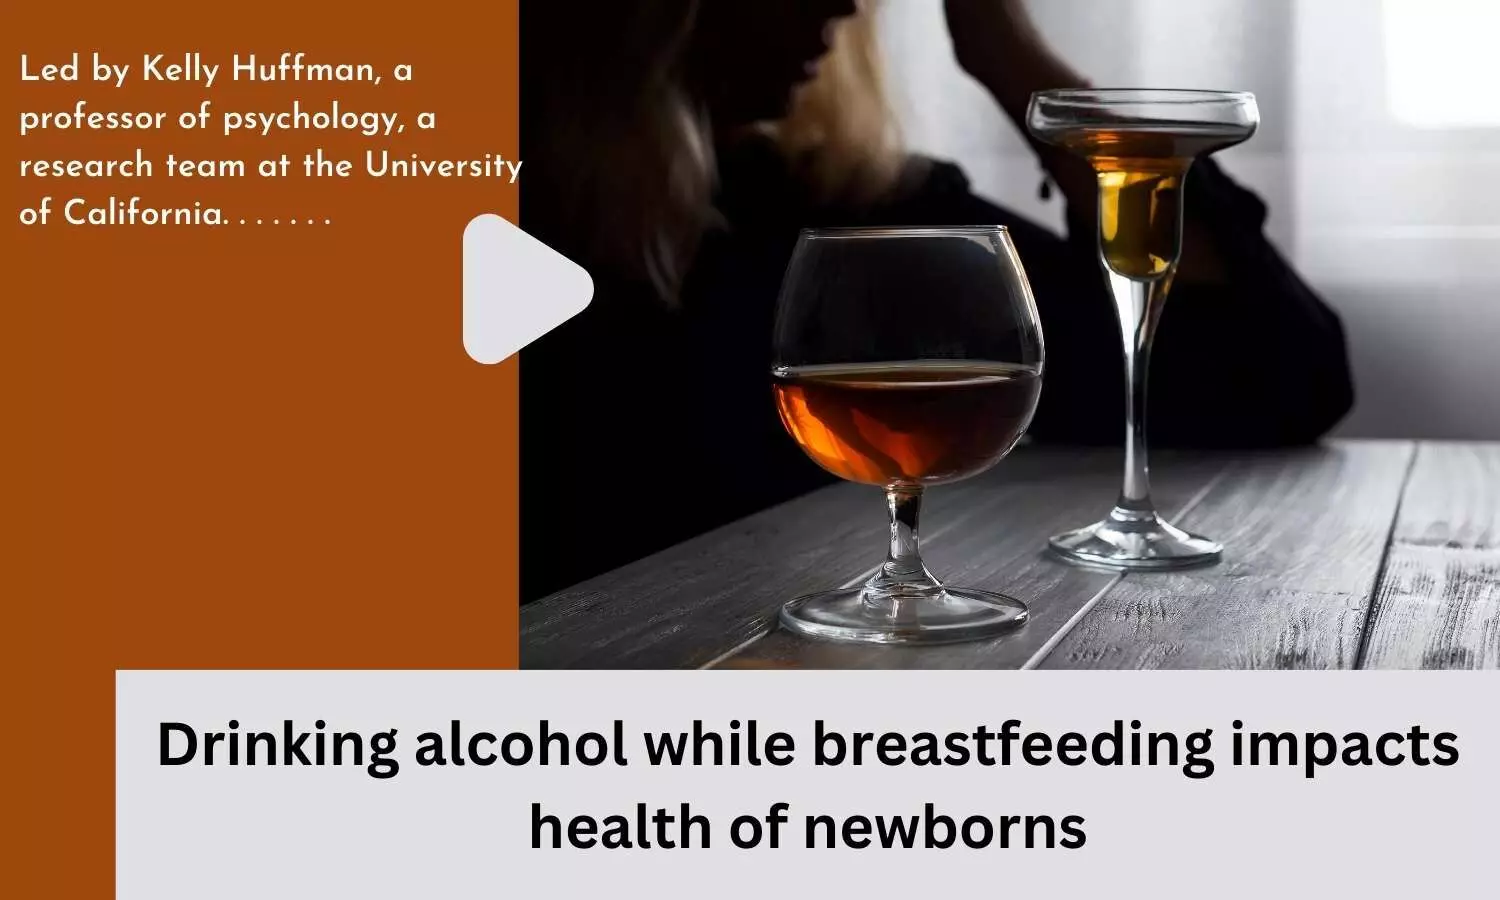 Drinking alcohol while breastfeeding impacts health of newborns